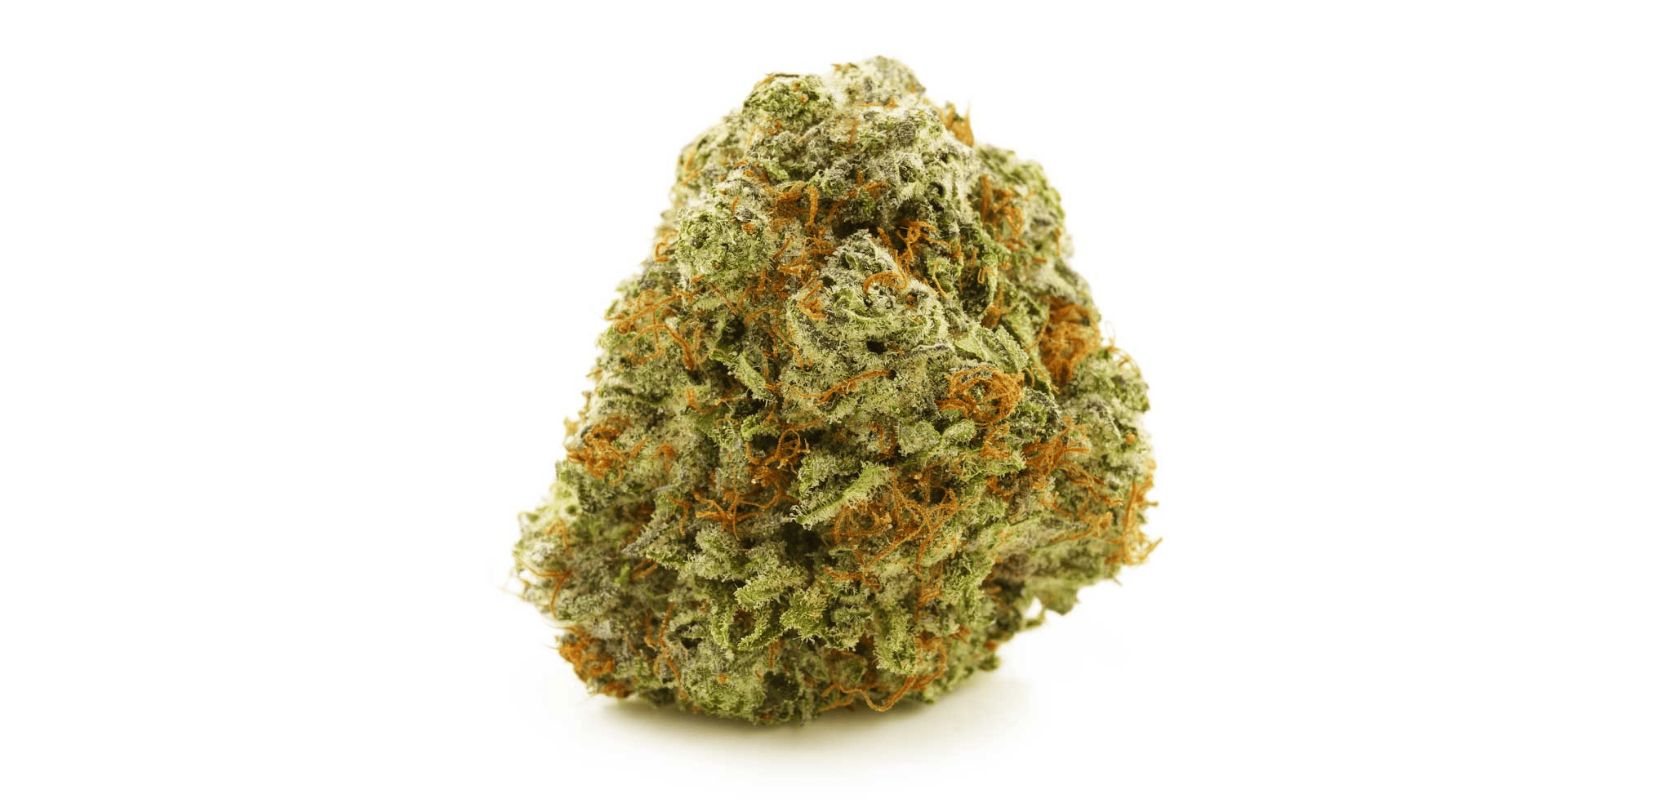 Like many other strains available in BC cannabis stores, Alaskan Thunderfuck may help with certain ailments. 